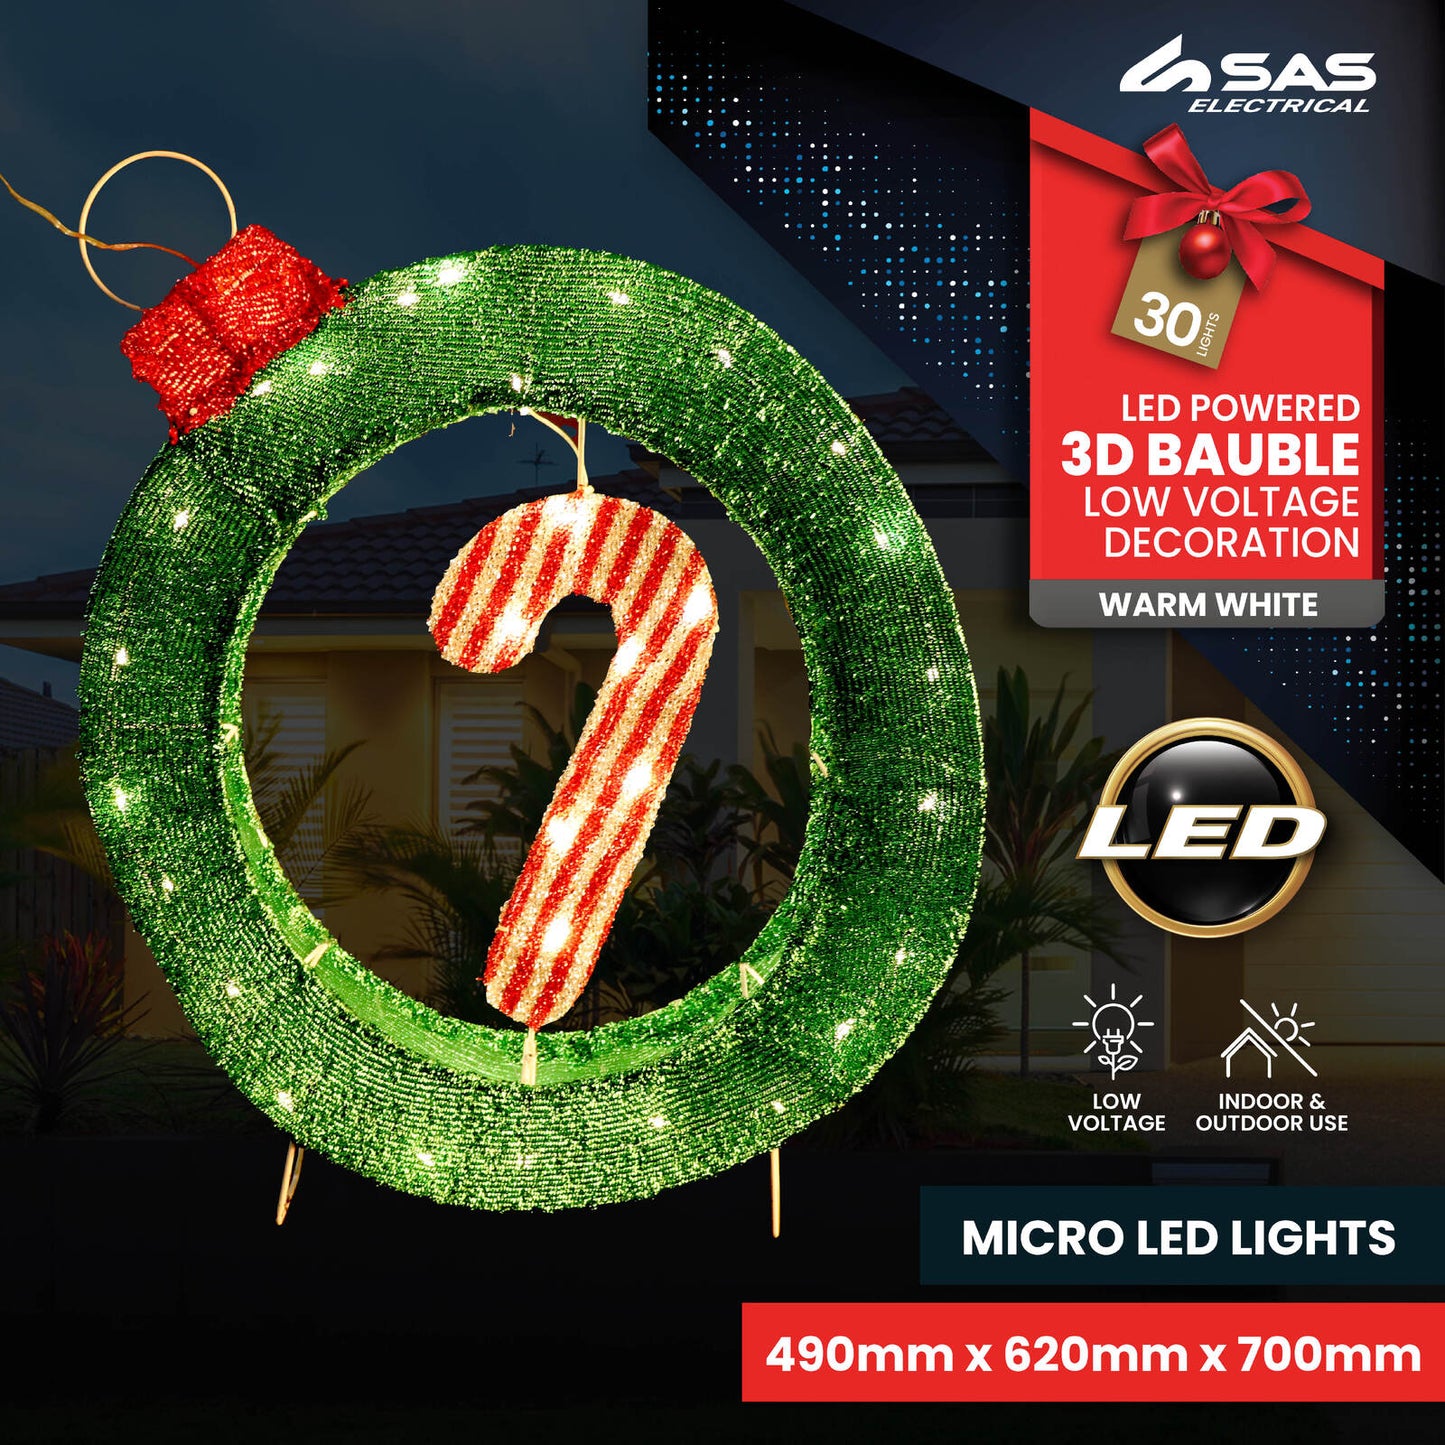 SAS Electrical 49 x 62cm 3D Bauble & Candy Cane Display Warm White Lighting